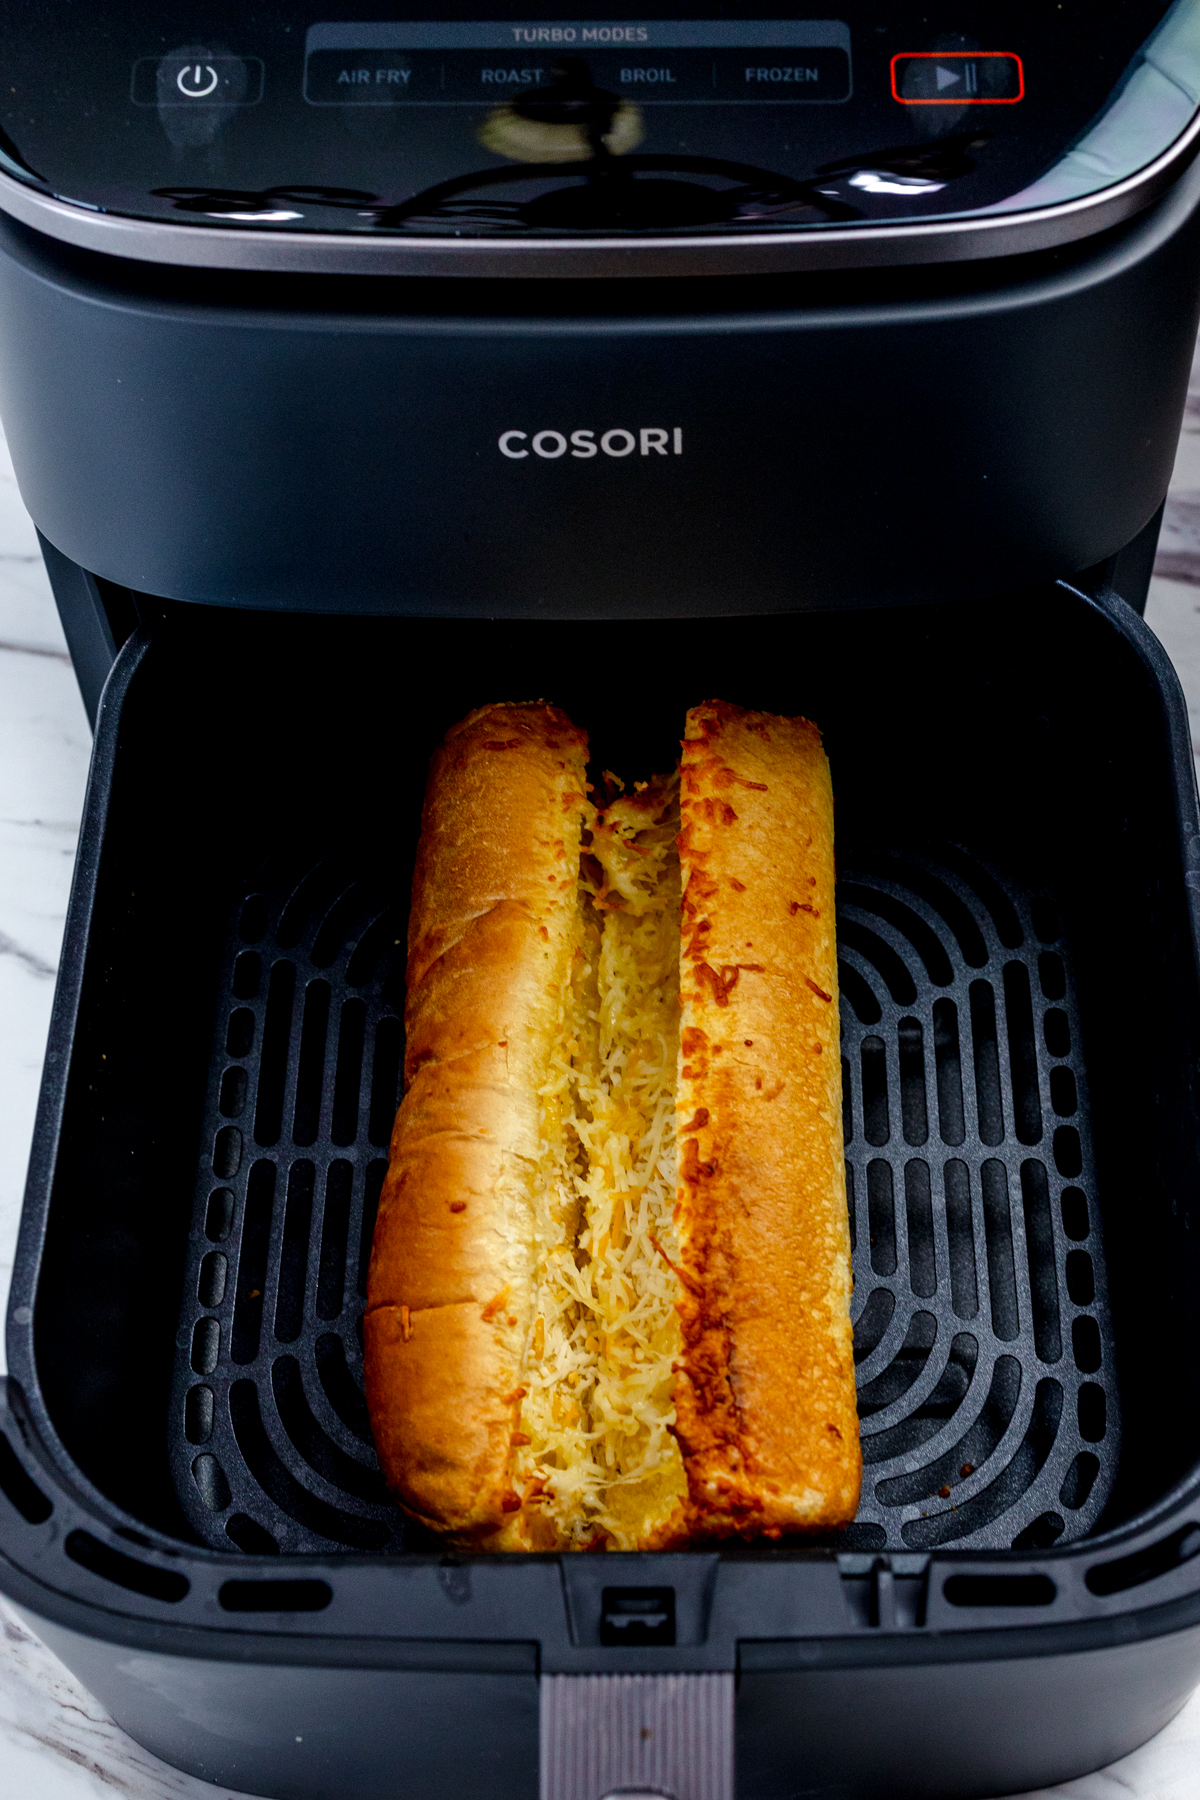 Top view of a cooked garlic bread loaf in an air fryer basket.